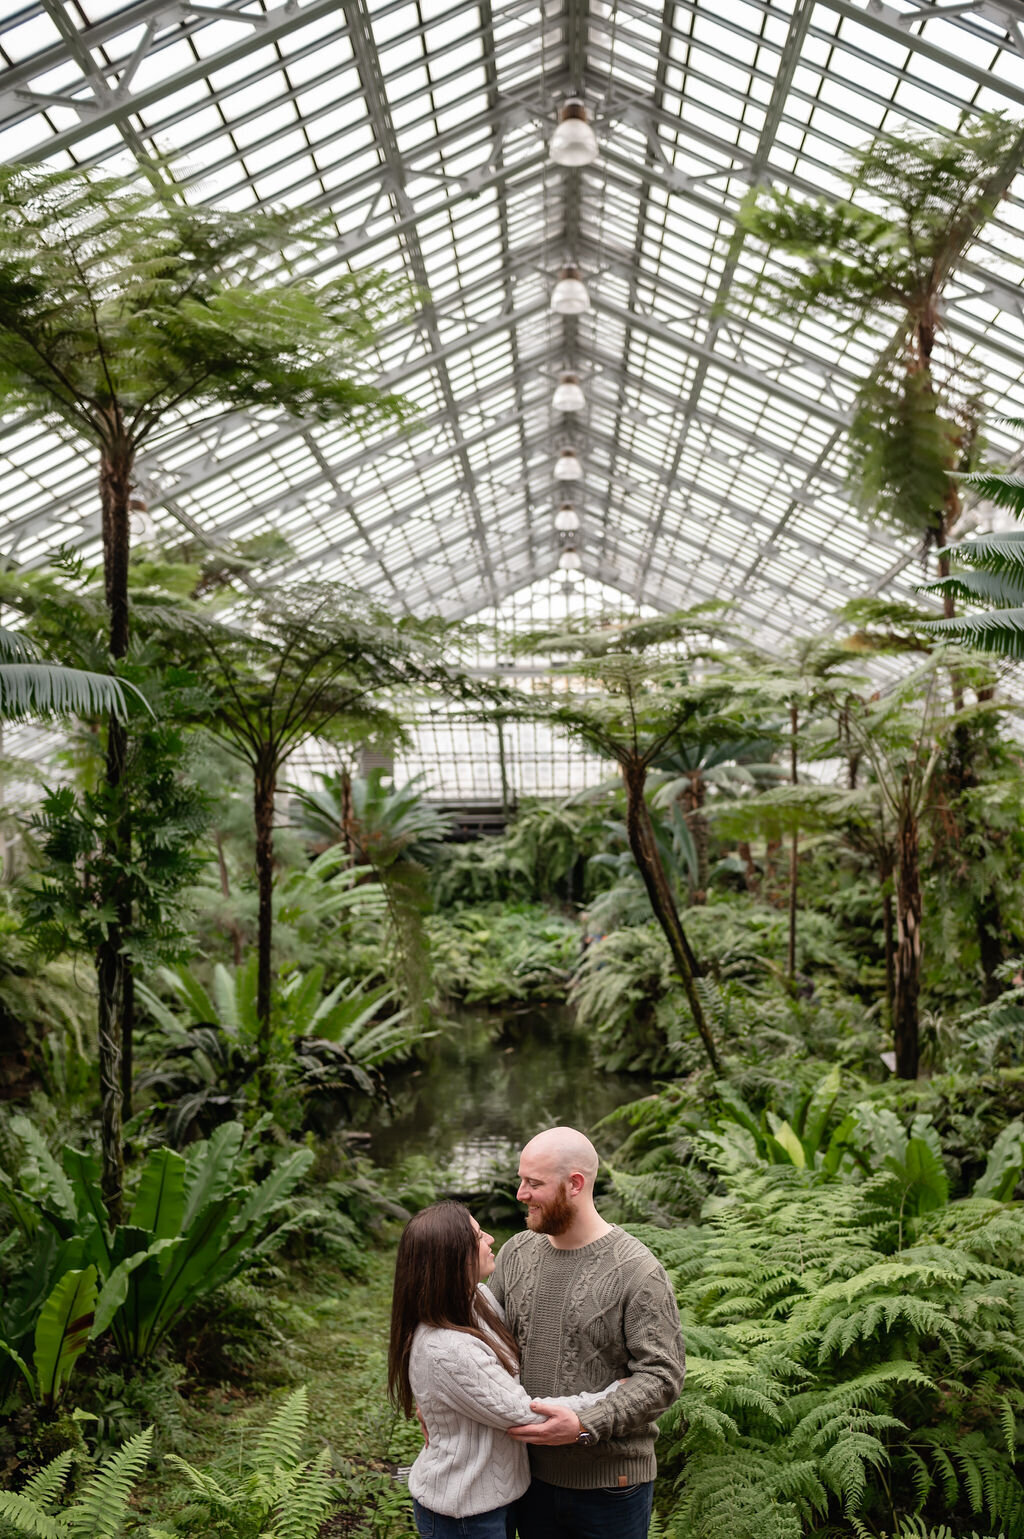 A couple embraces surrounded by greenery at the Garfield Park Conservatory